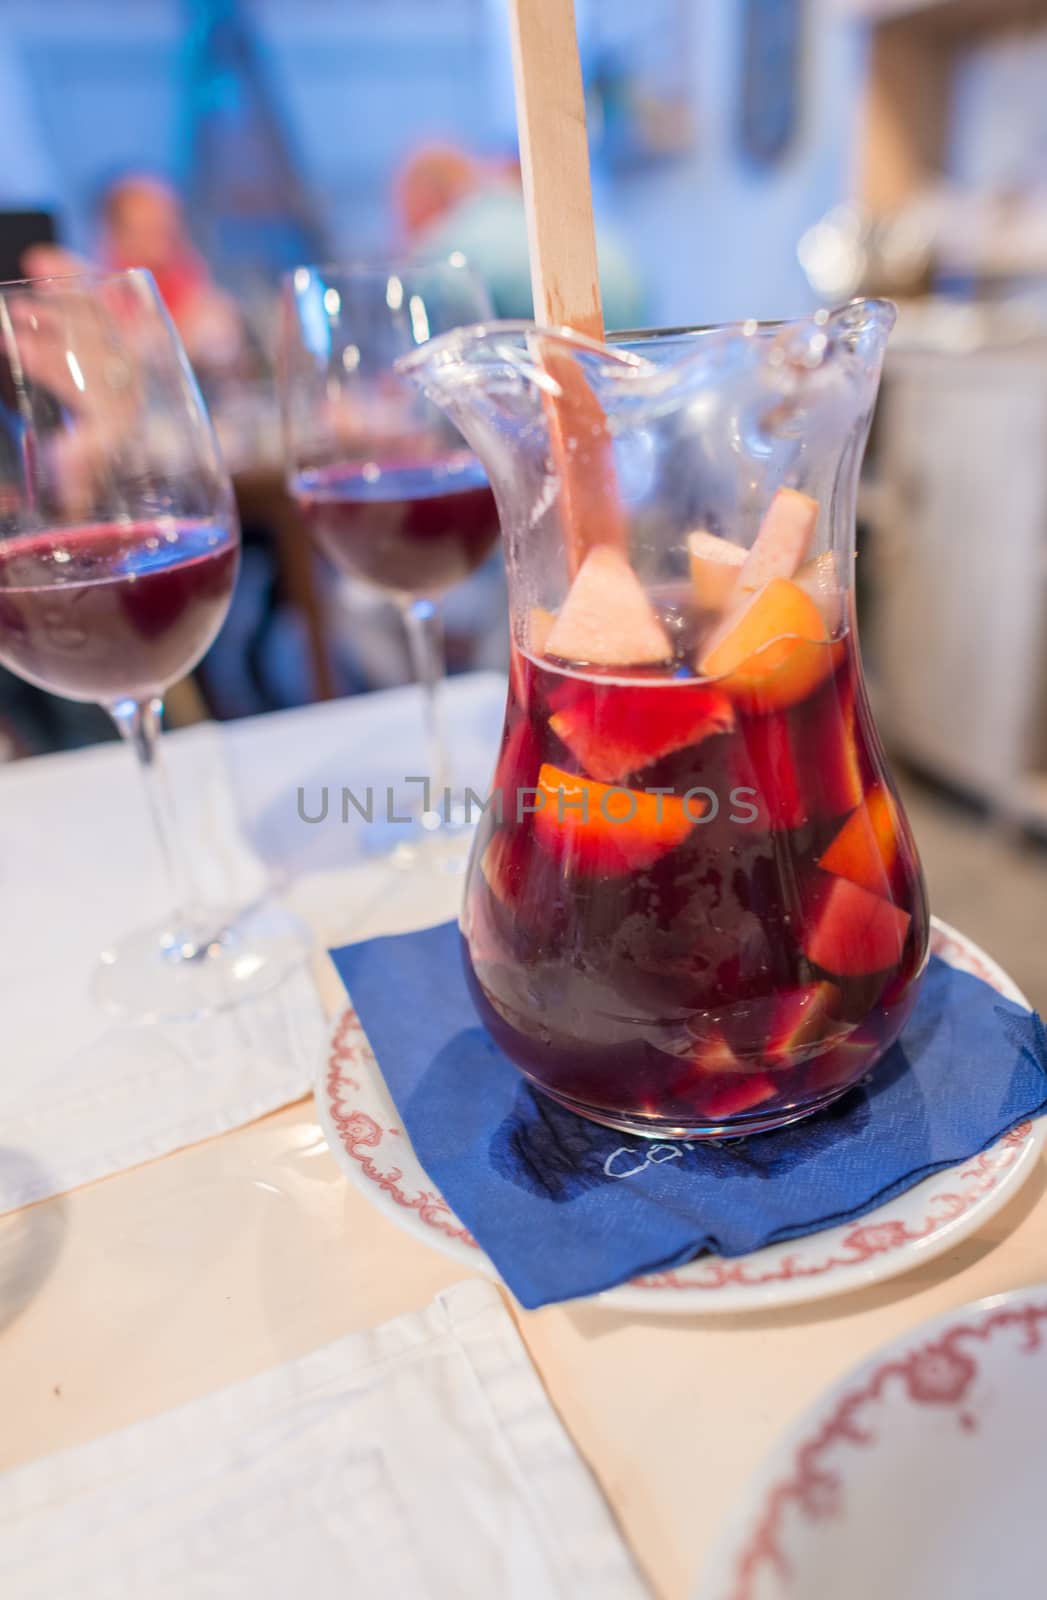 Large jar of sangria with red wine, oranges and ice served in a by jovannig